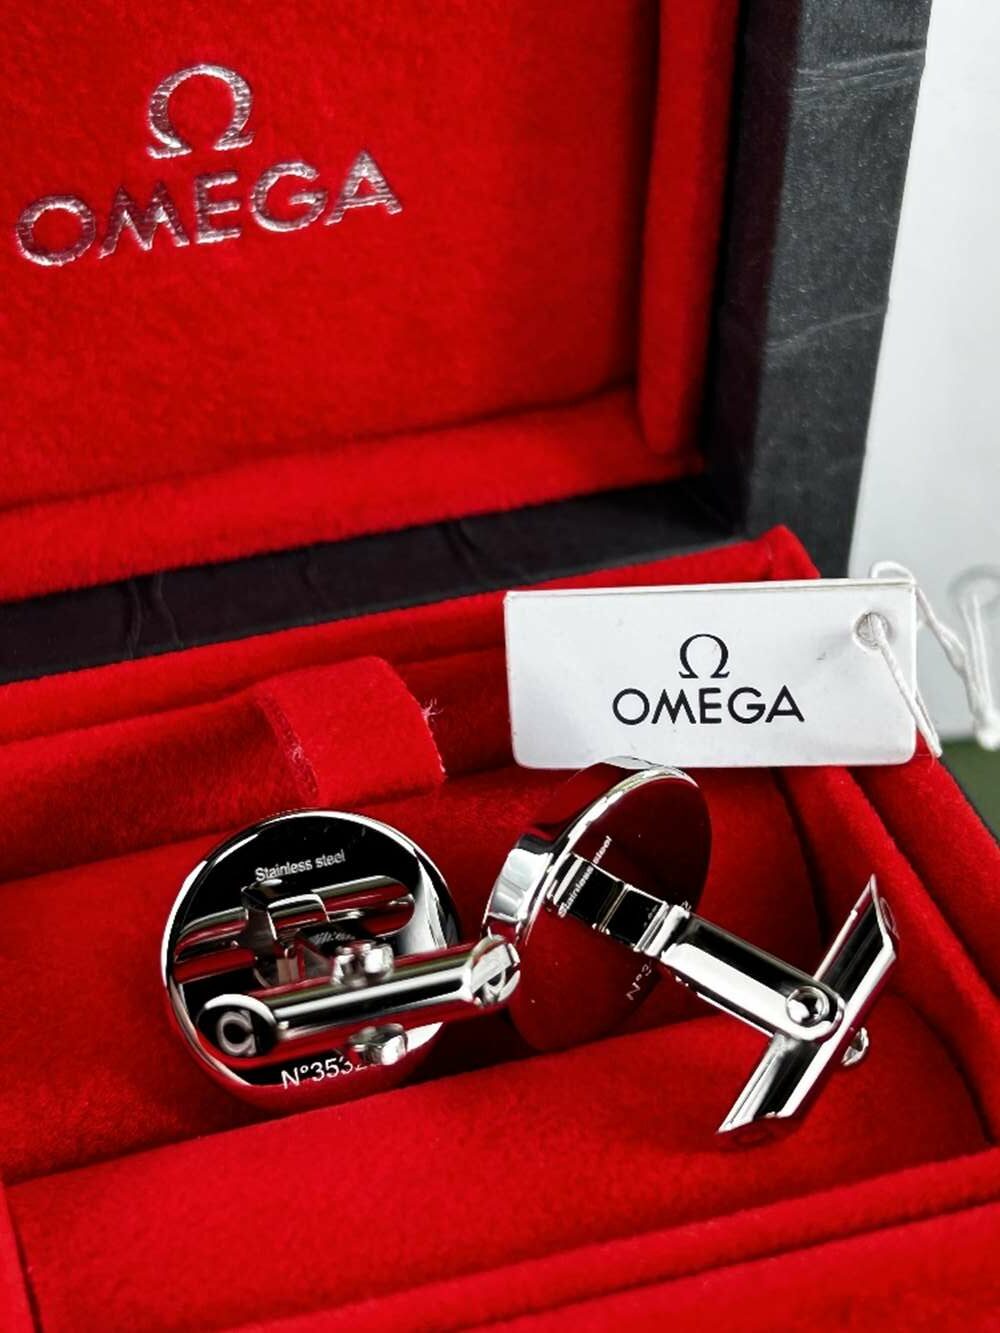 Omega Official Merchandise Gent`s Cufflinks - Image 2 of 8